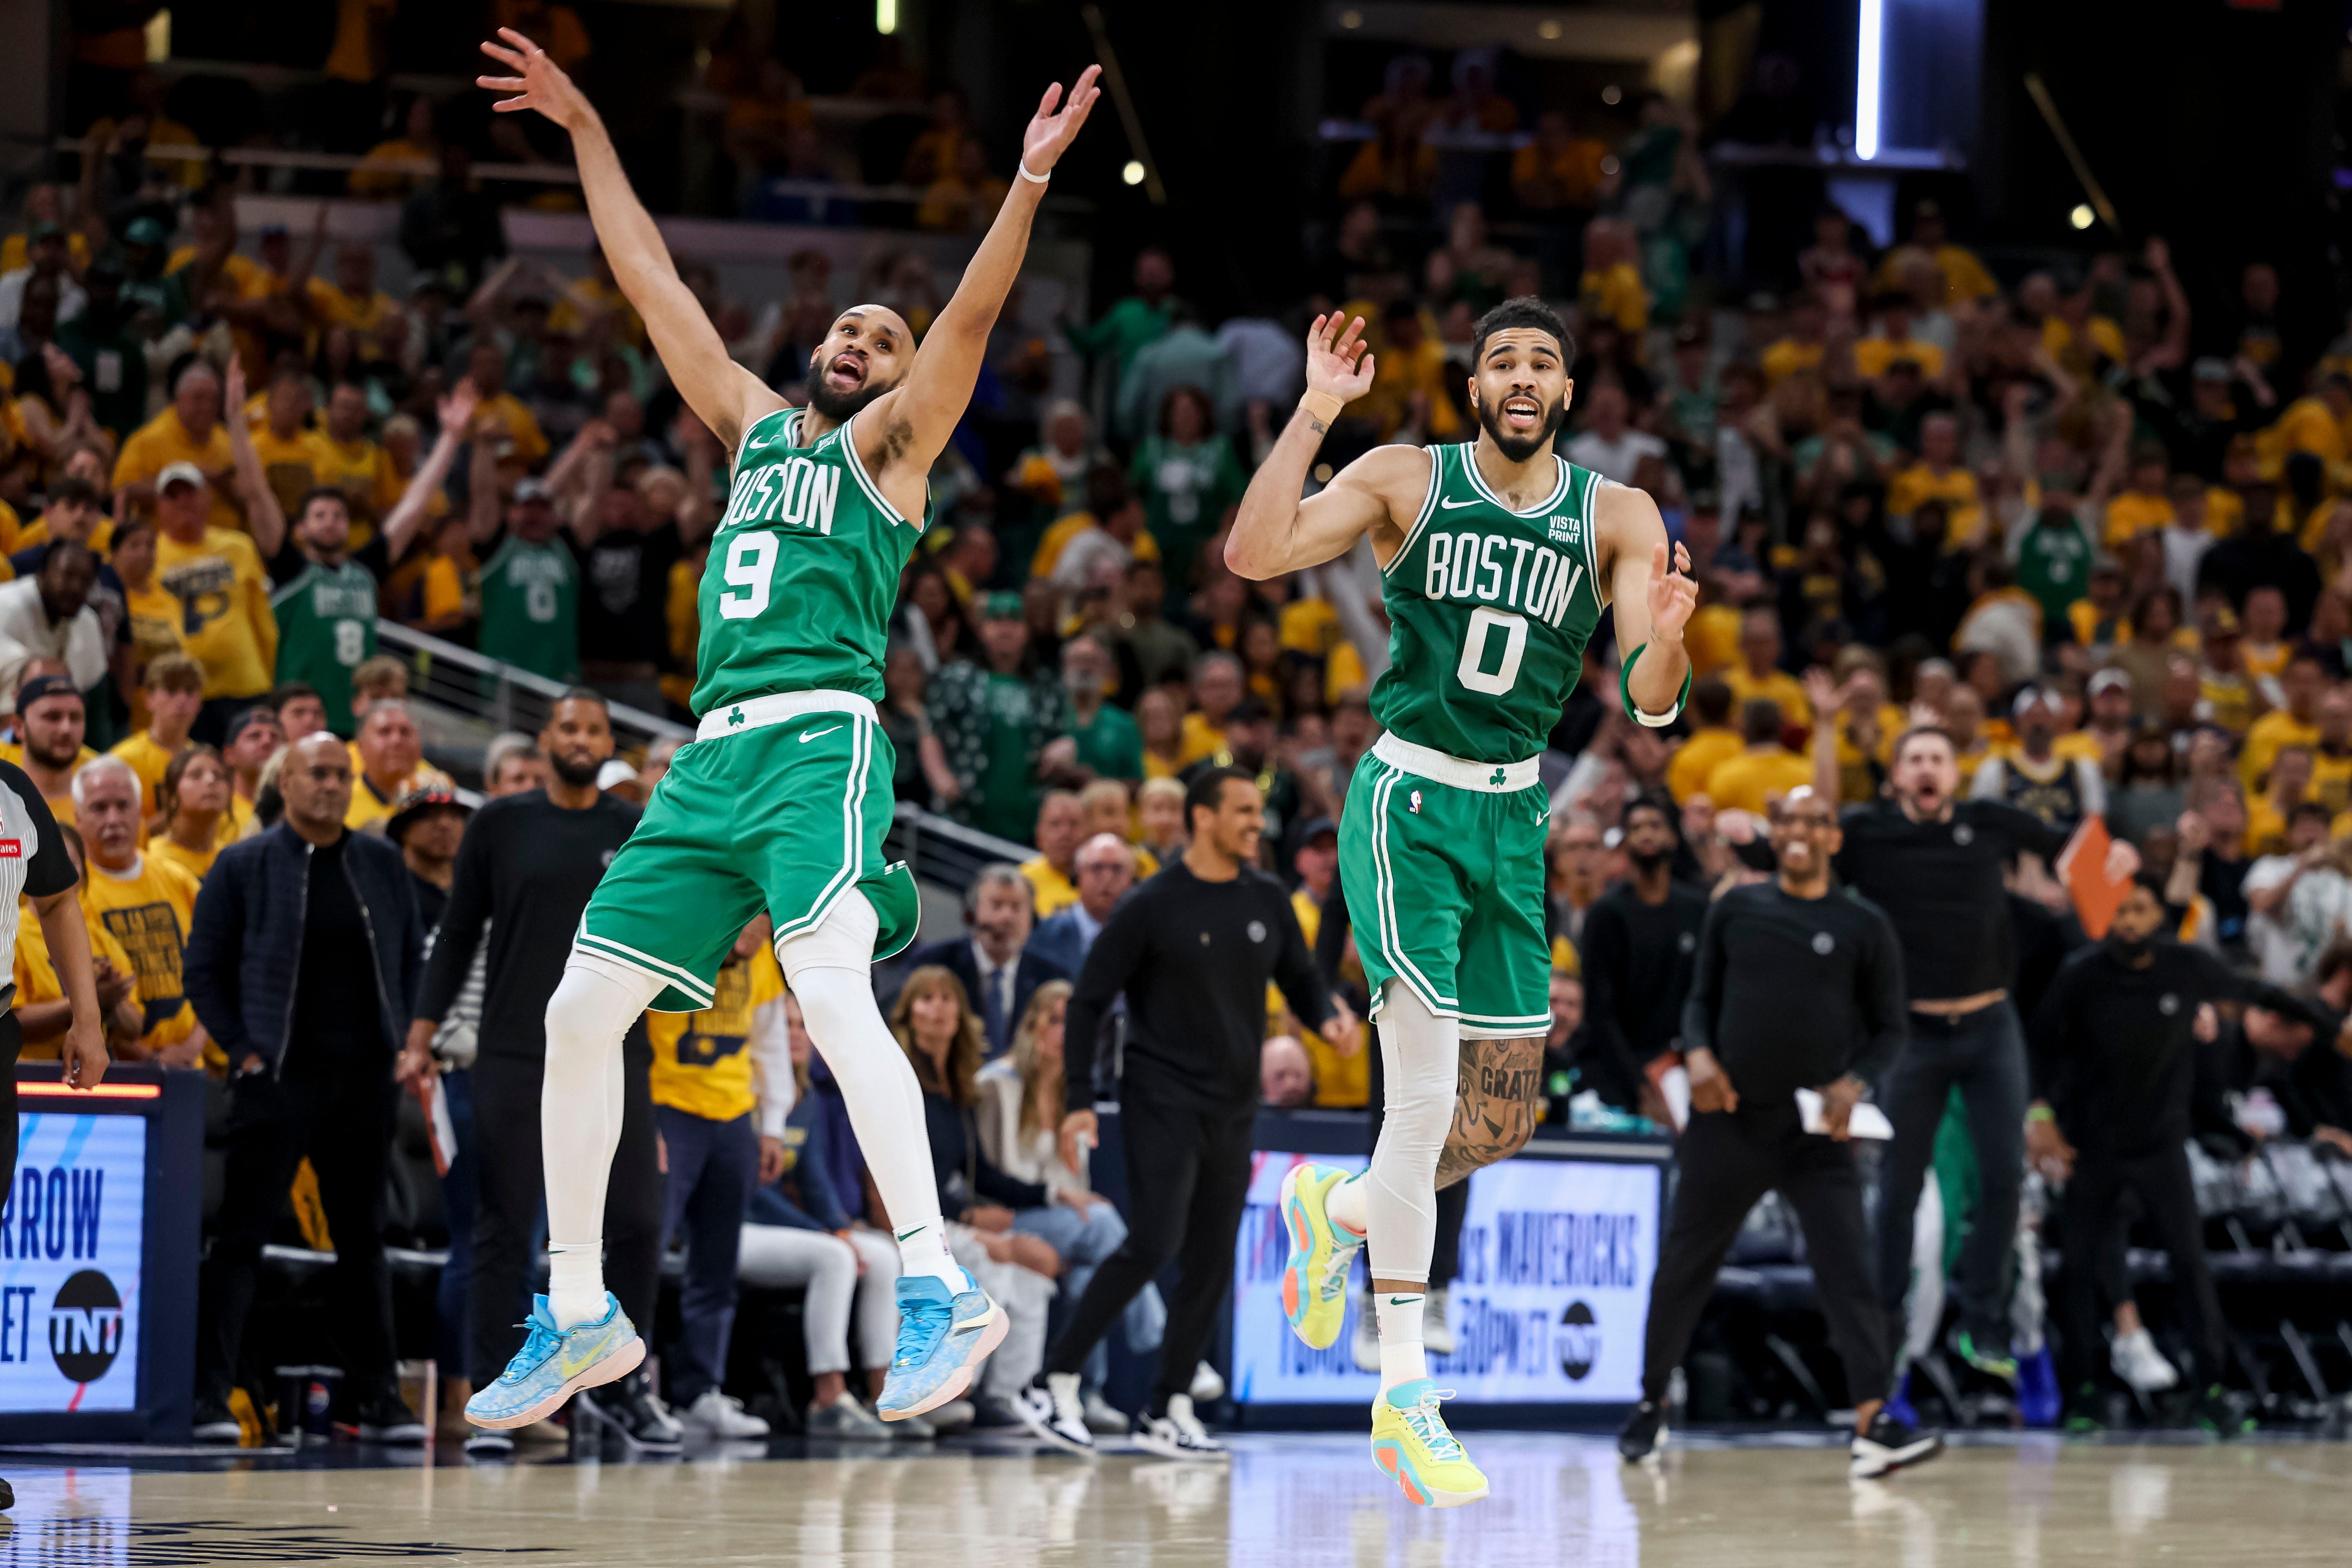 Boston Celtics now just four wins from passing Los Angeles Lakers for most NBA titles